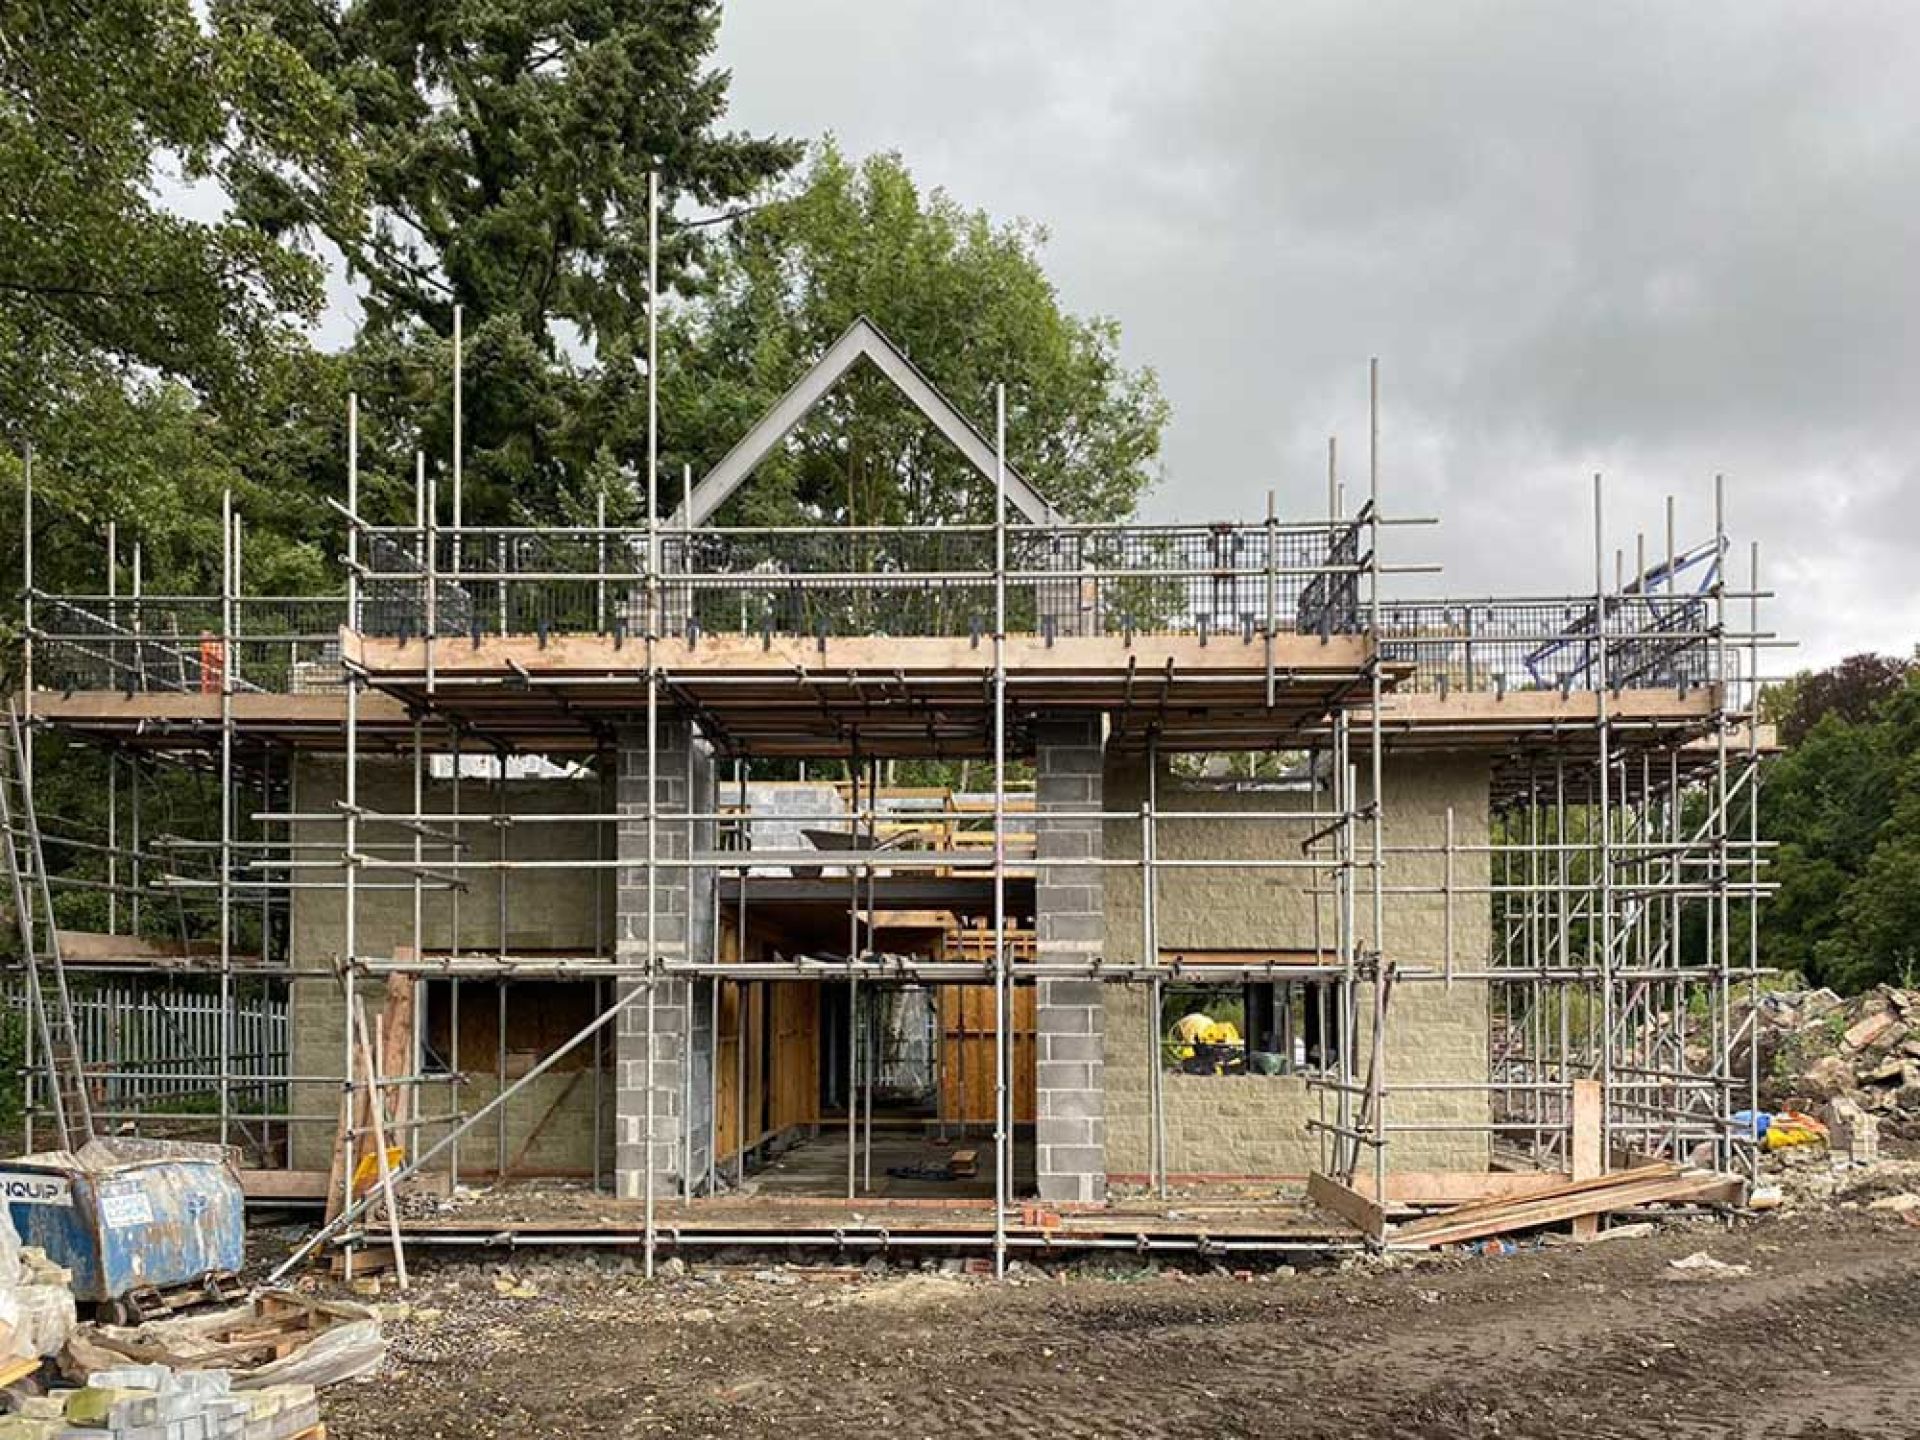 Construction progress of five bedroom manor house with walls built up and roof started.